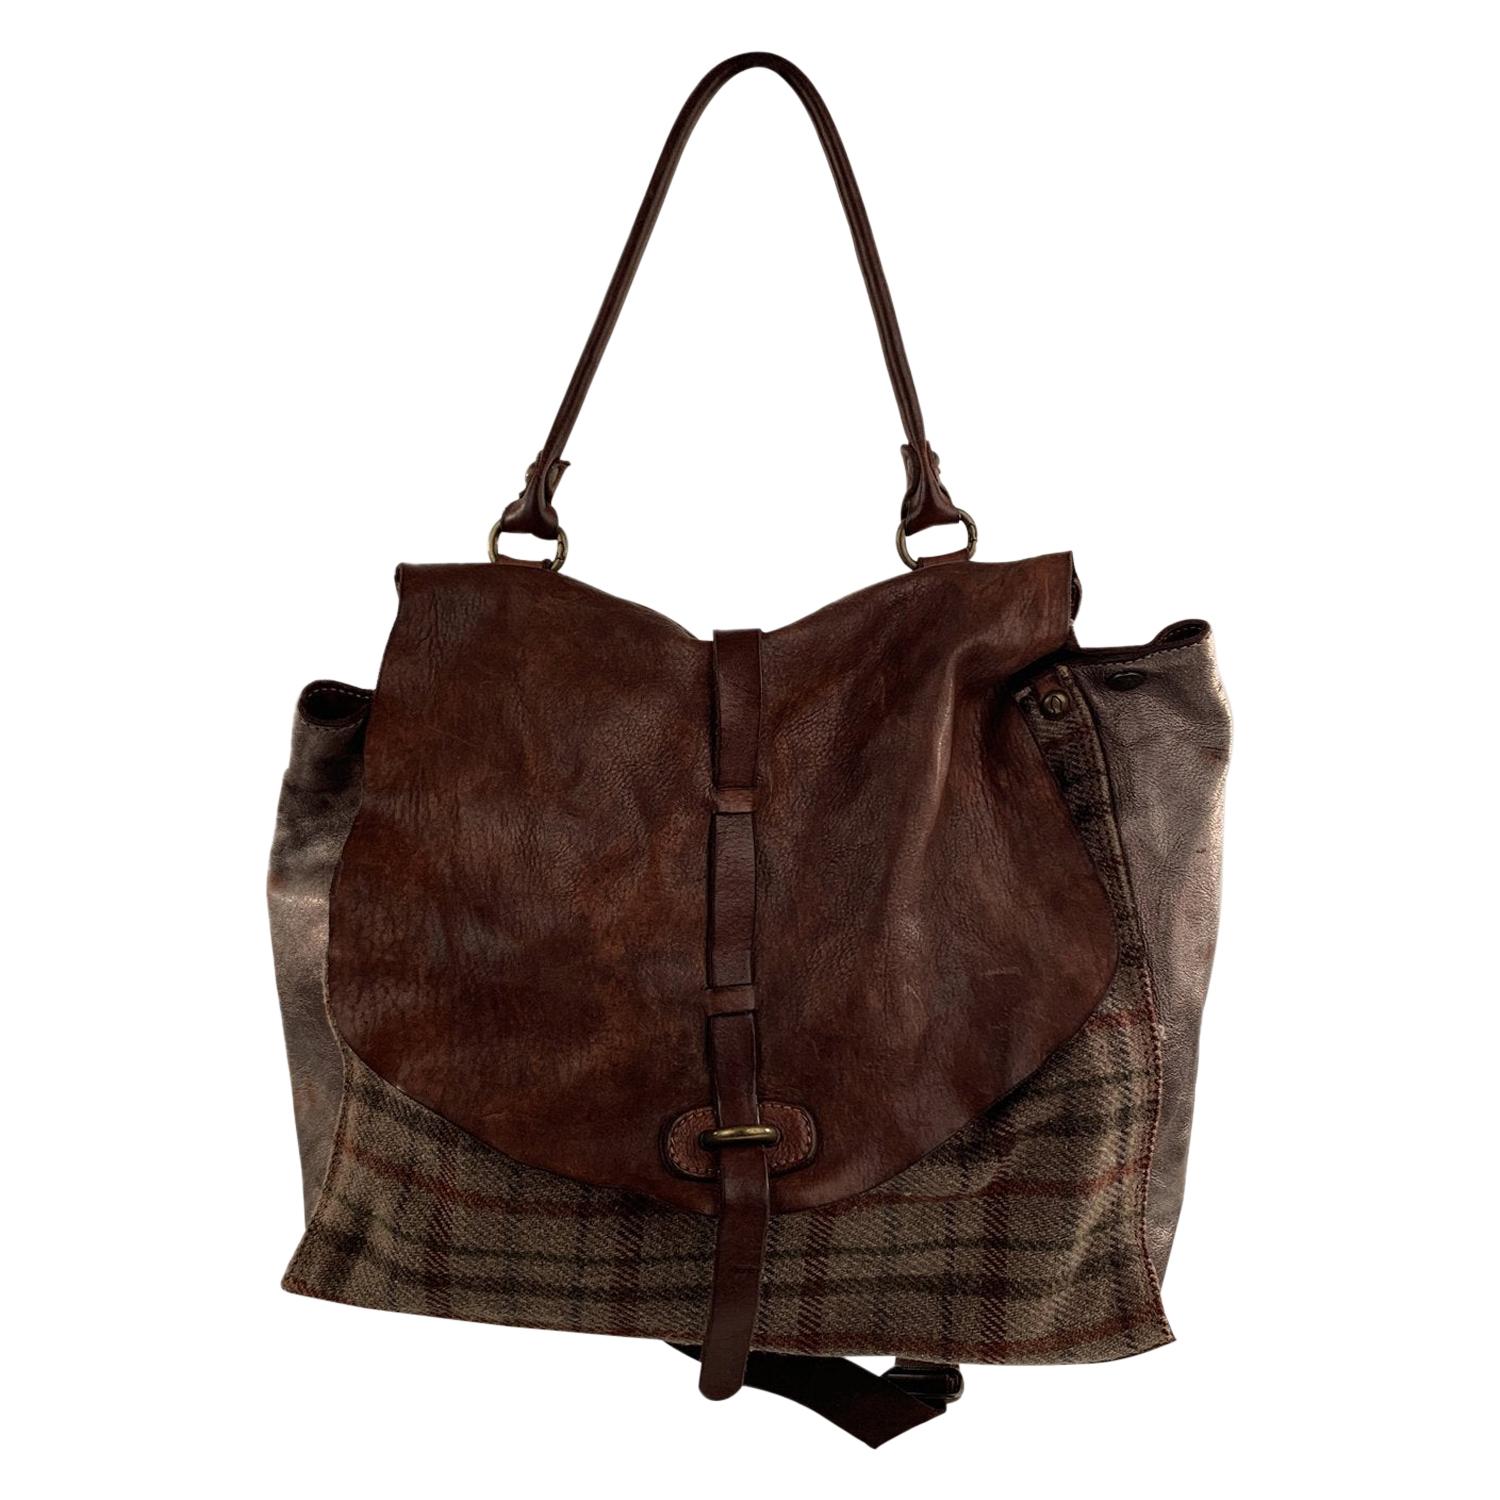 Campomaggi Teodorano Brown Plaid Wool and Leather Shoulder Bag